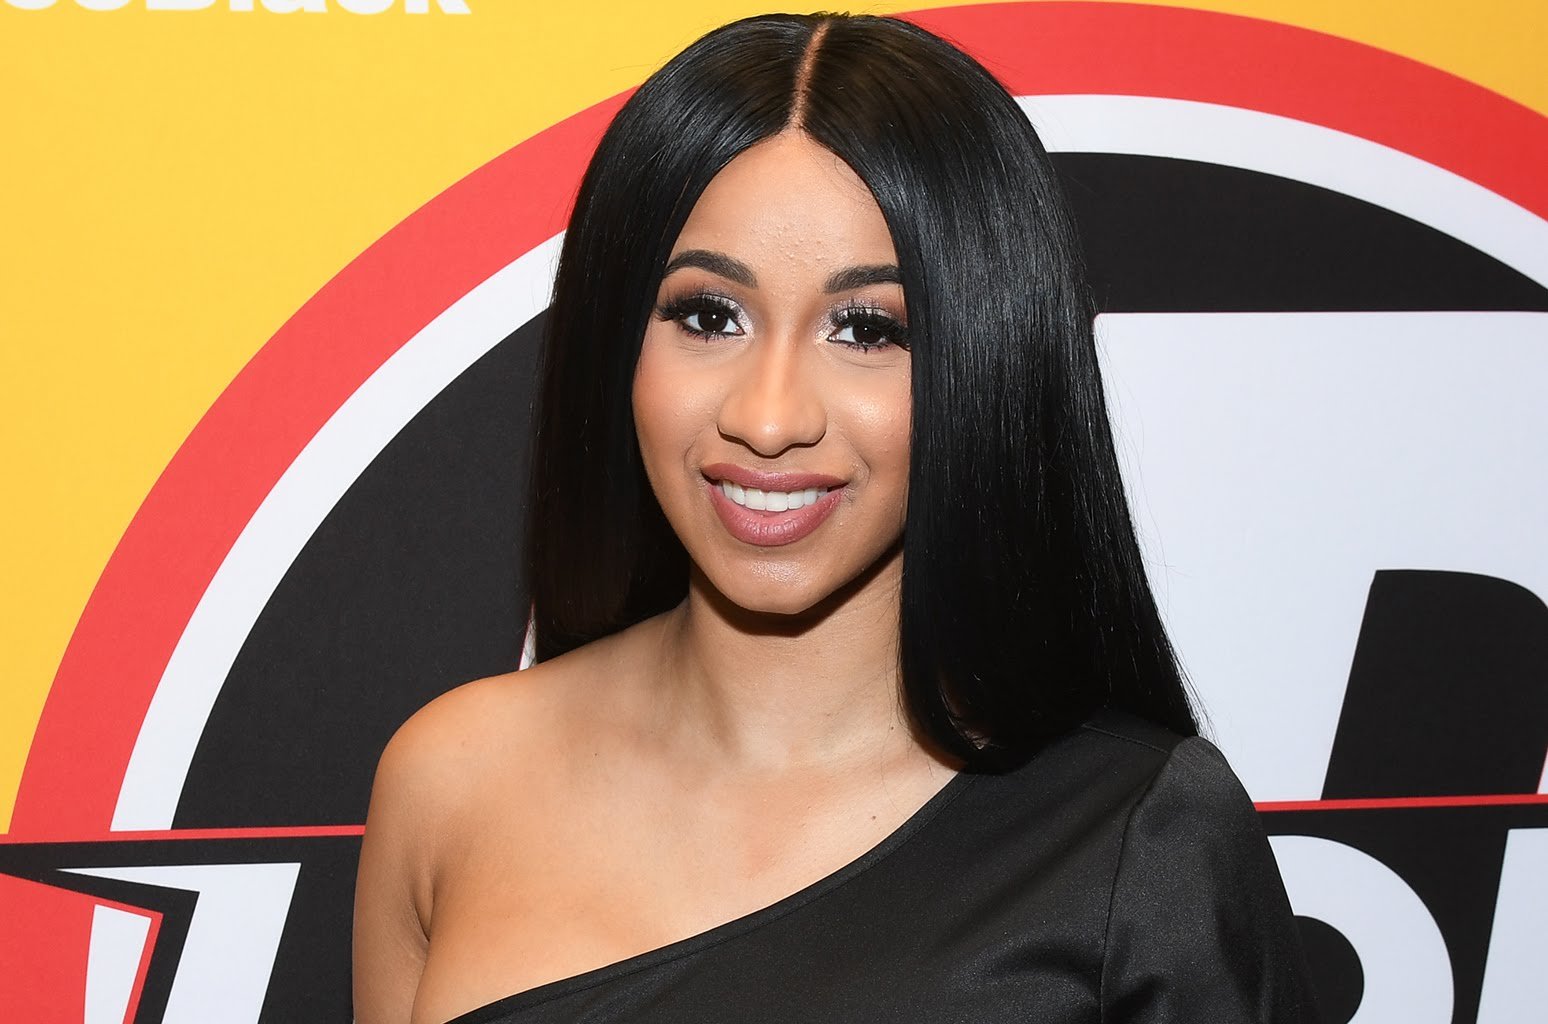 Cardi B Indicted On Felony Assault Charges Following Strip Club Brawl